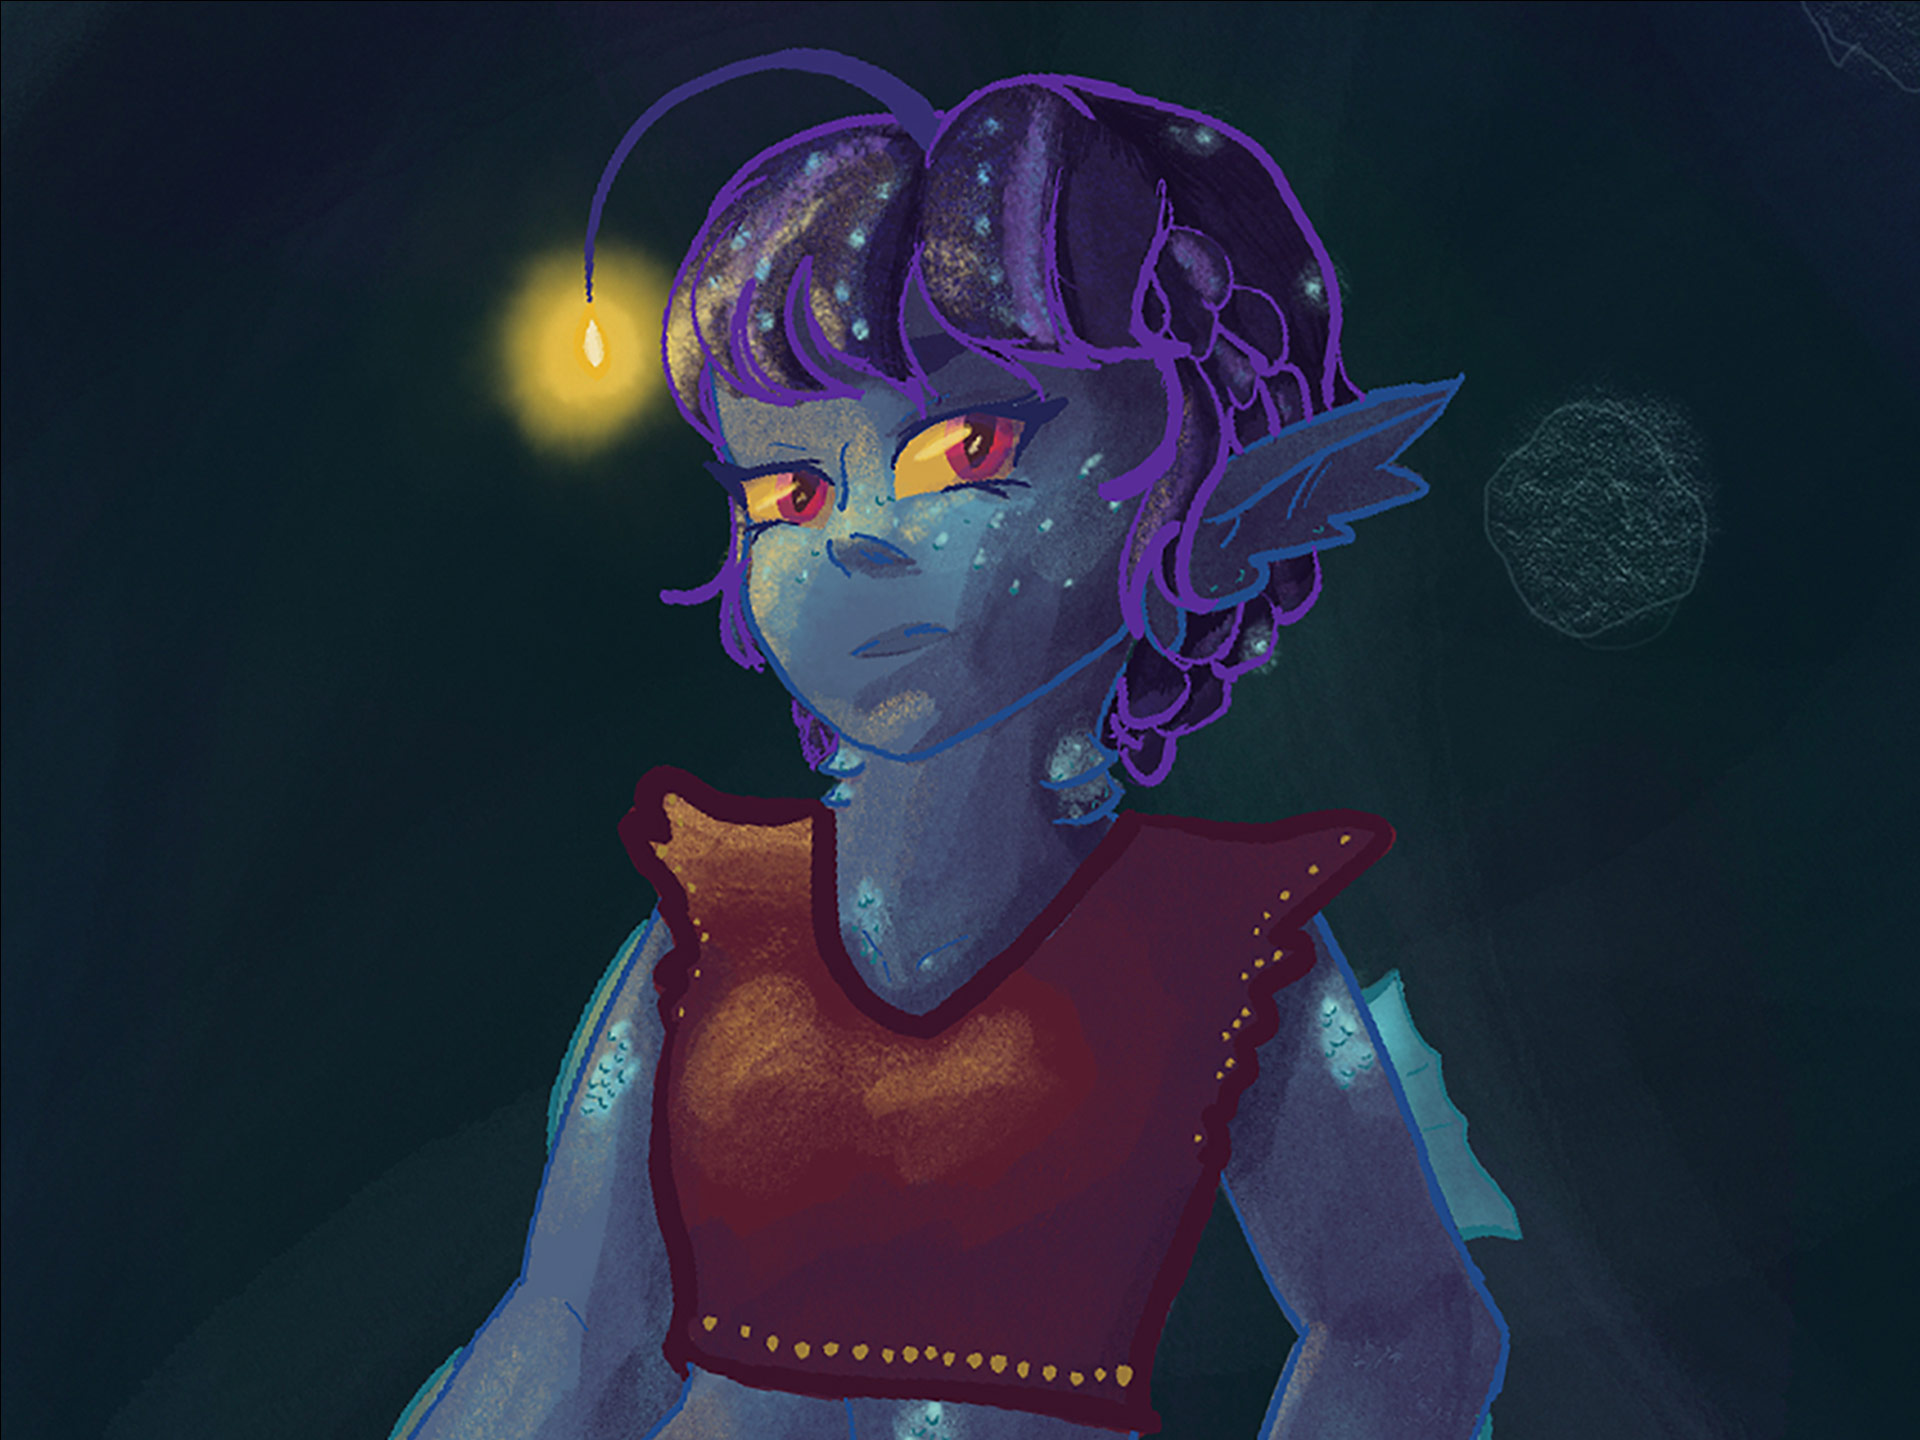 A cropped image of a blue humanoid angler fish in a red top. They have purple hair and a slight scowl.